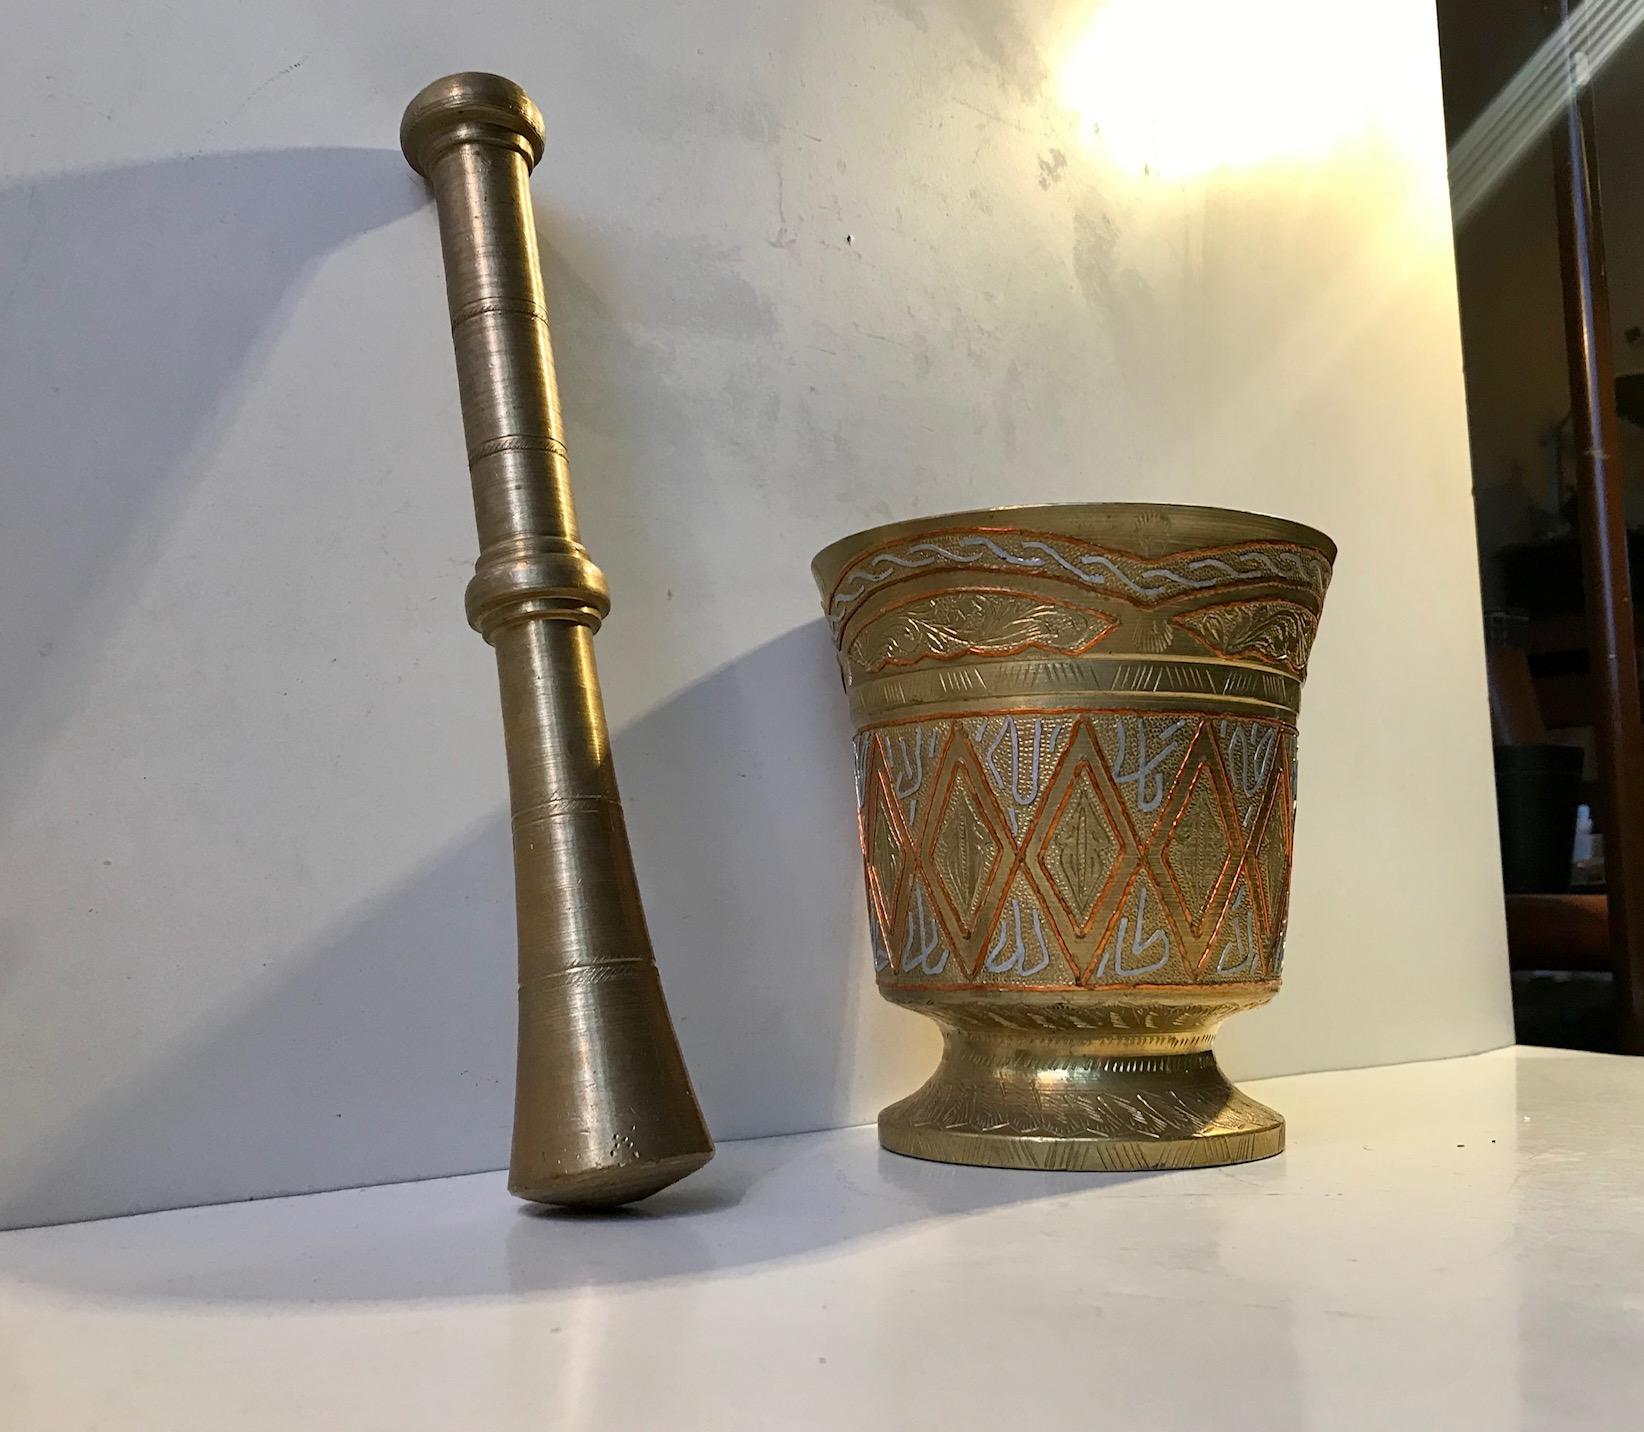 A large decorative Mortar and accompanying Pestle. The mortar is made from solid hand-engraved bronze with in- and on-lay in silver and copper thread. Harlequin patterns and Islamic text are also present around its perimeter. It was manufactured by